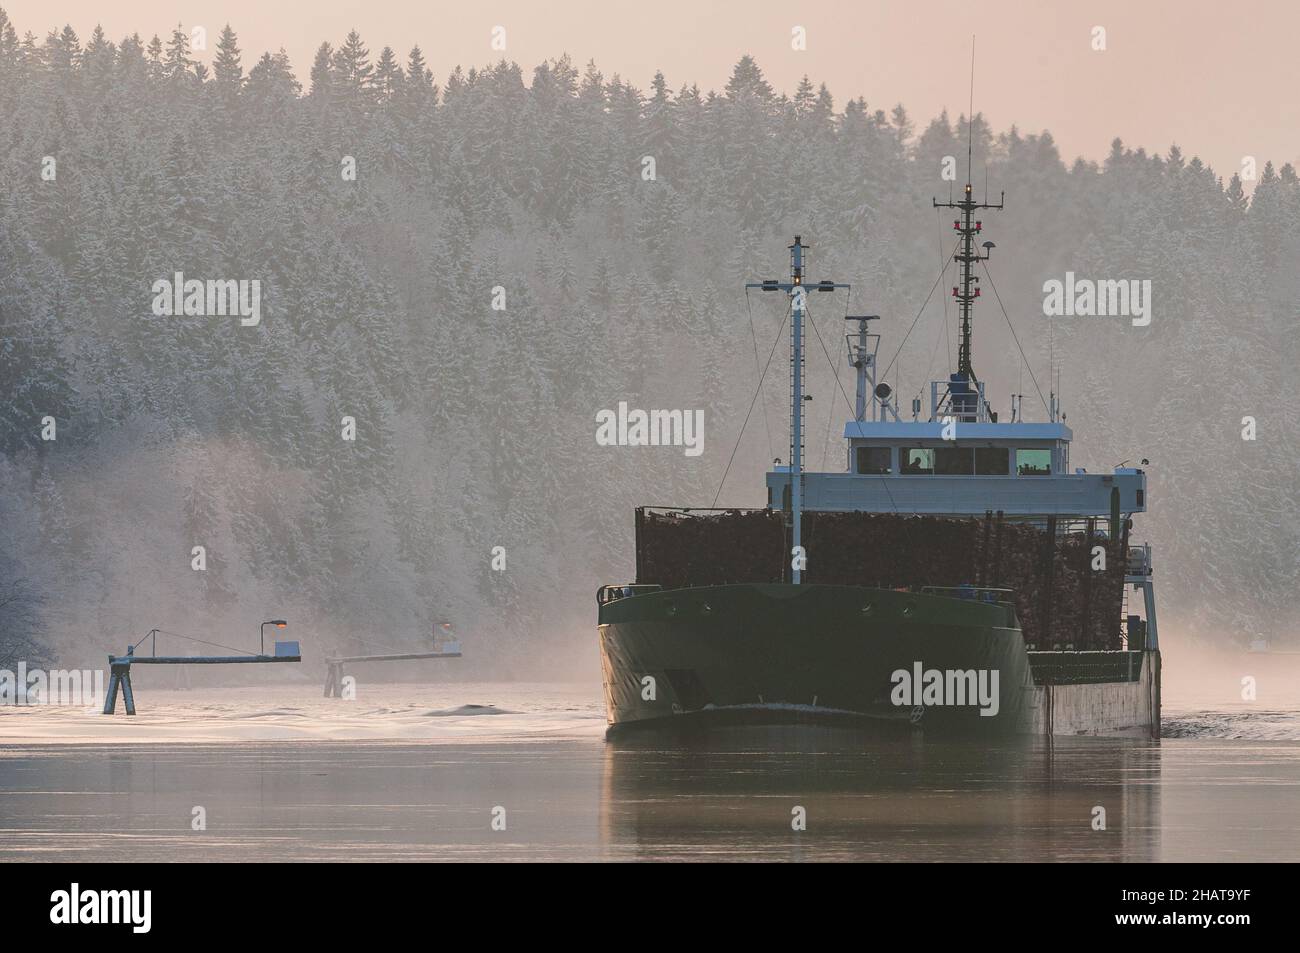 Freight ship on river, Sweden Stock Photo